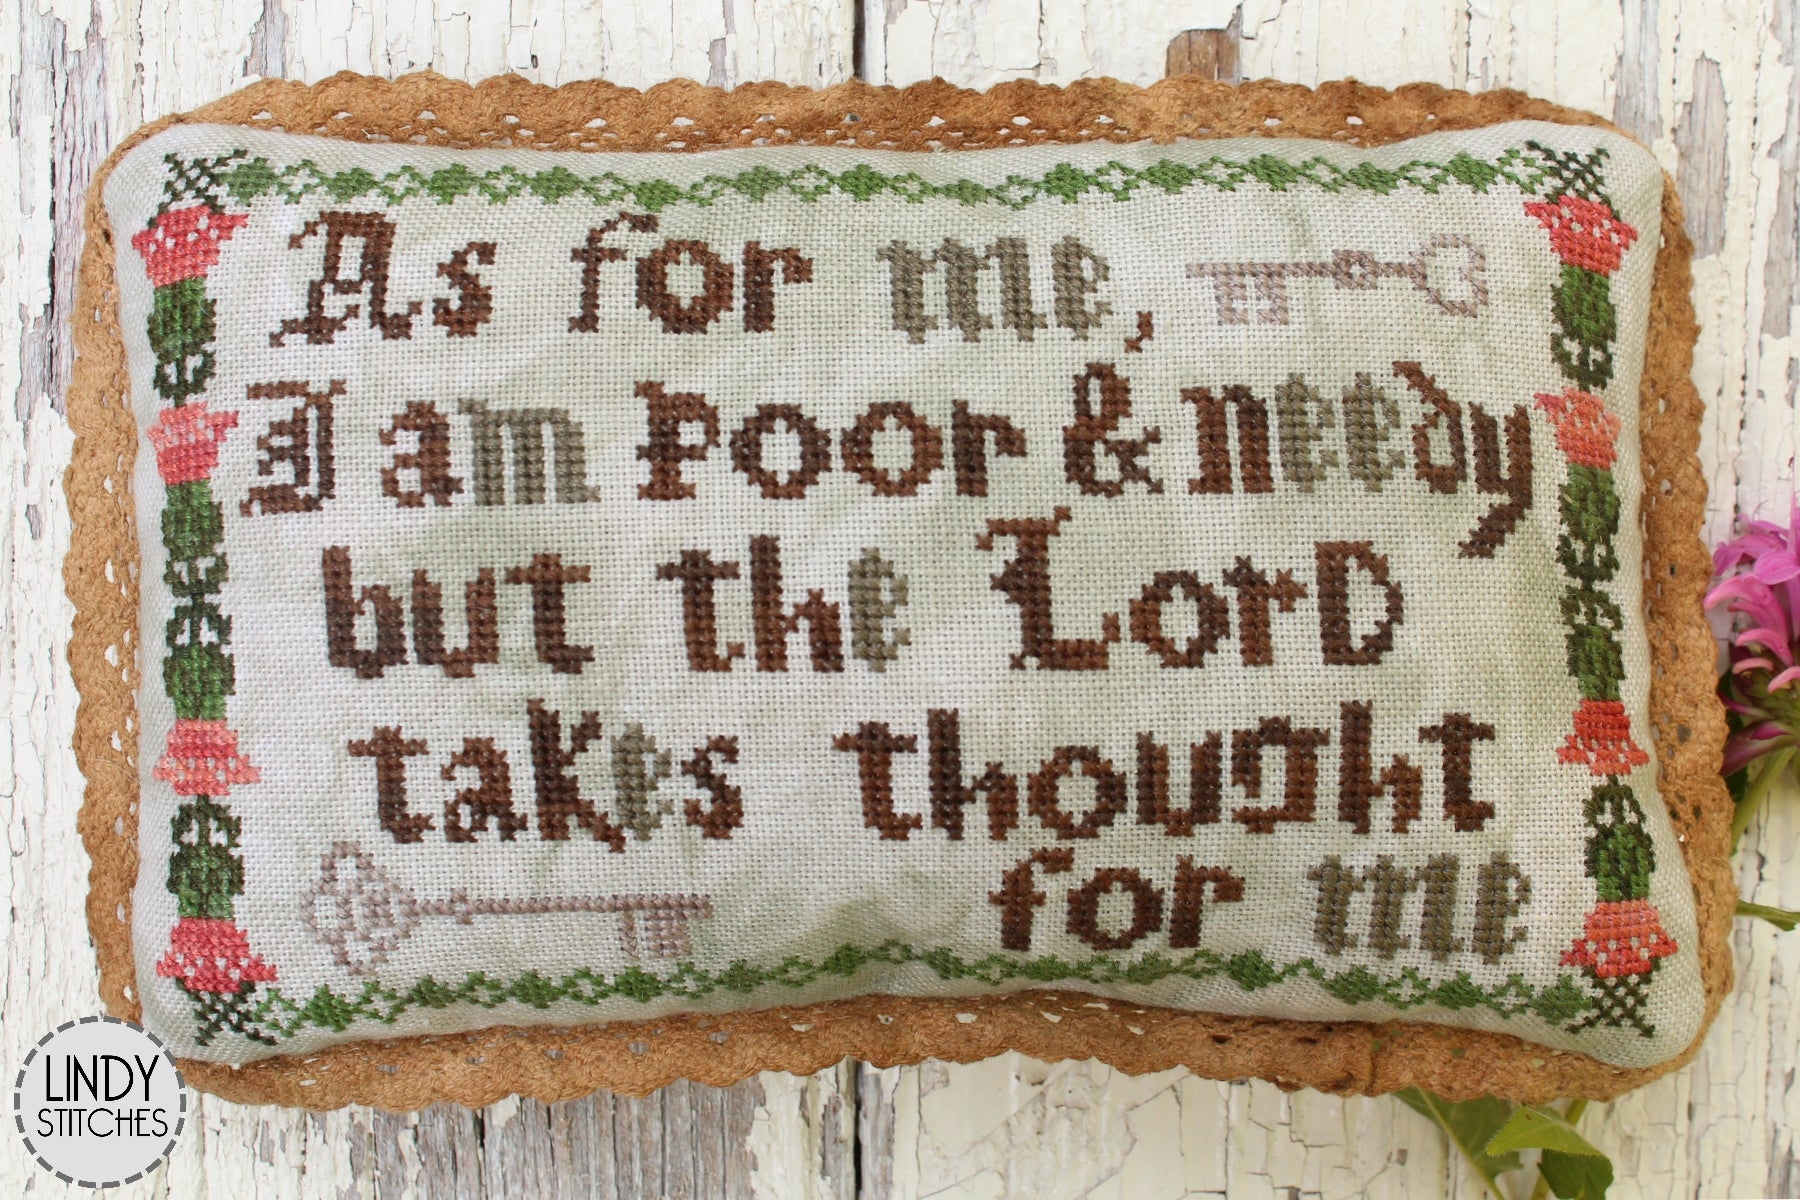 Poor and Needy | Lindy Stitches